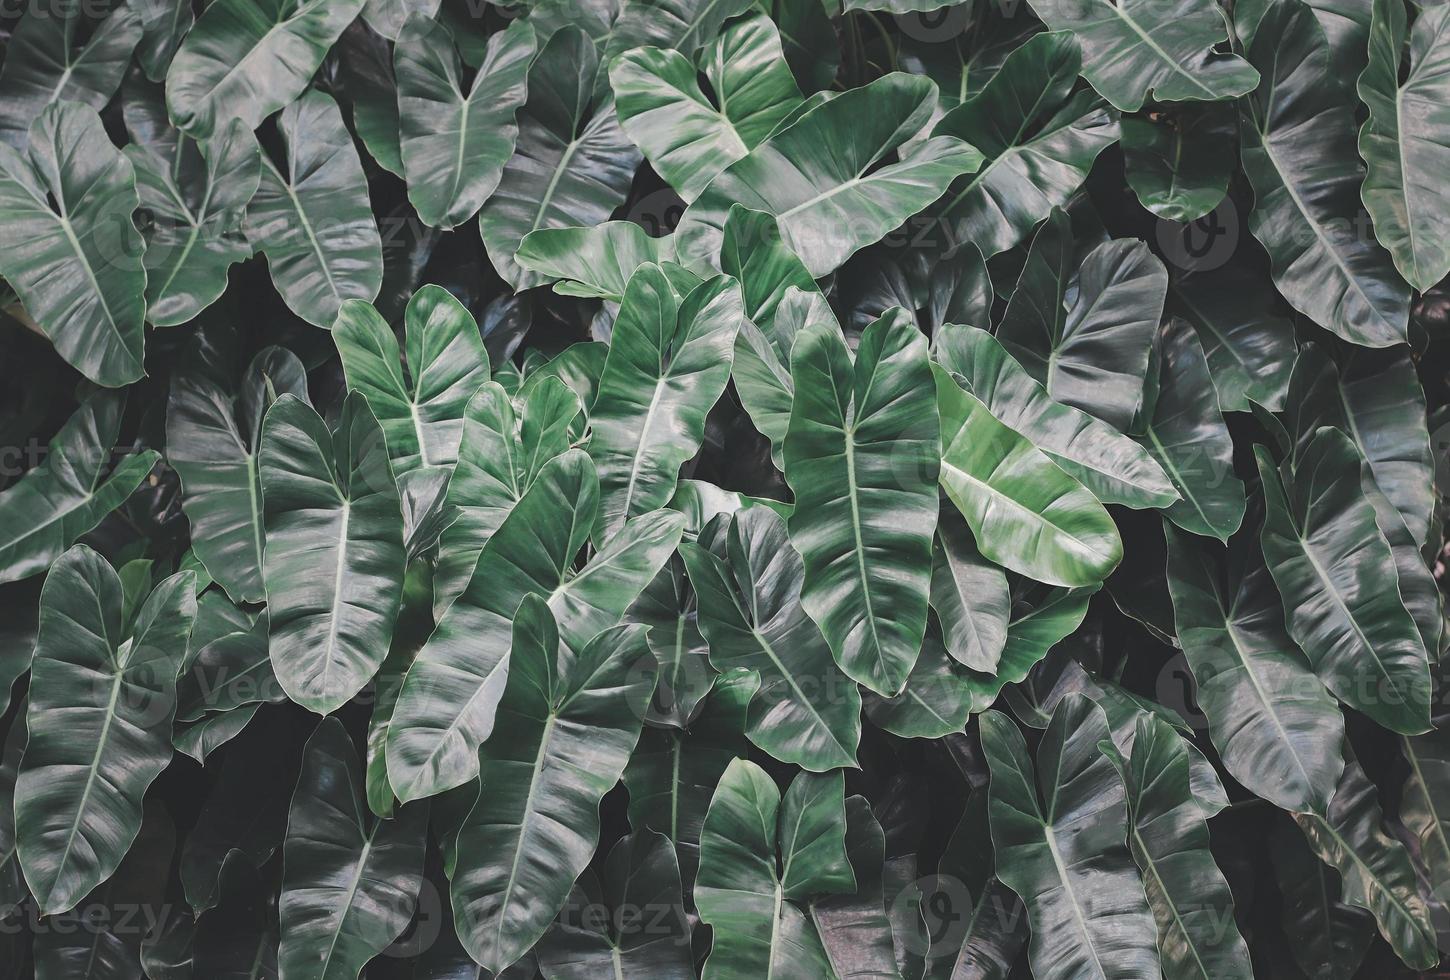 Philodendron burle marx green leaves. photo